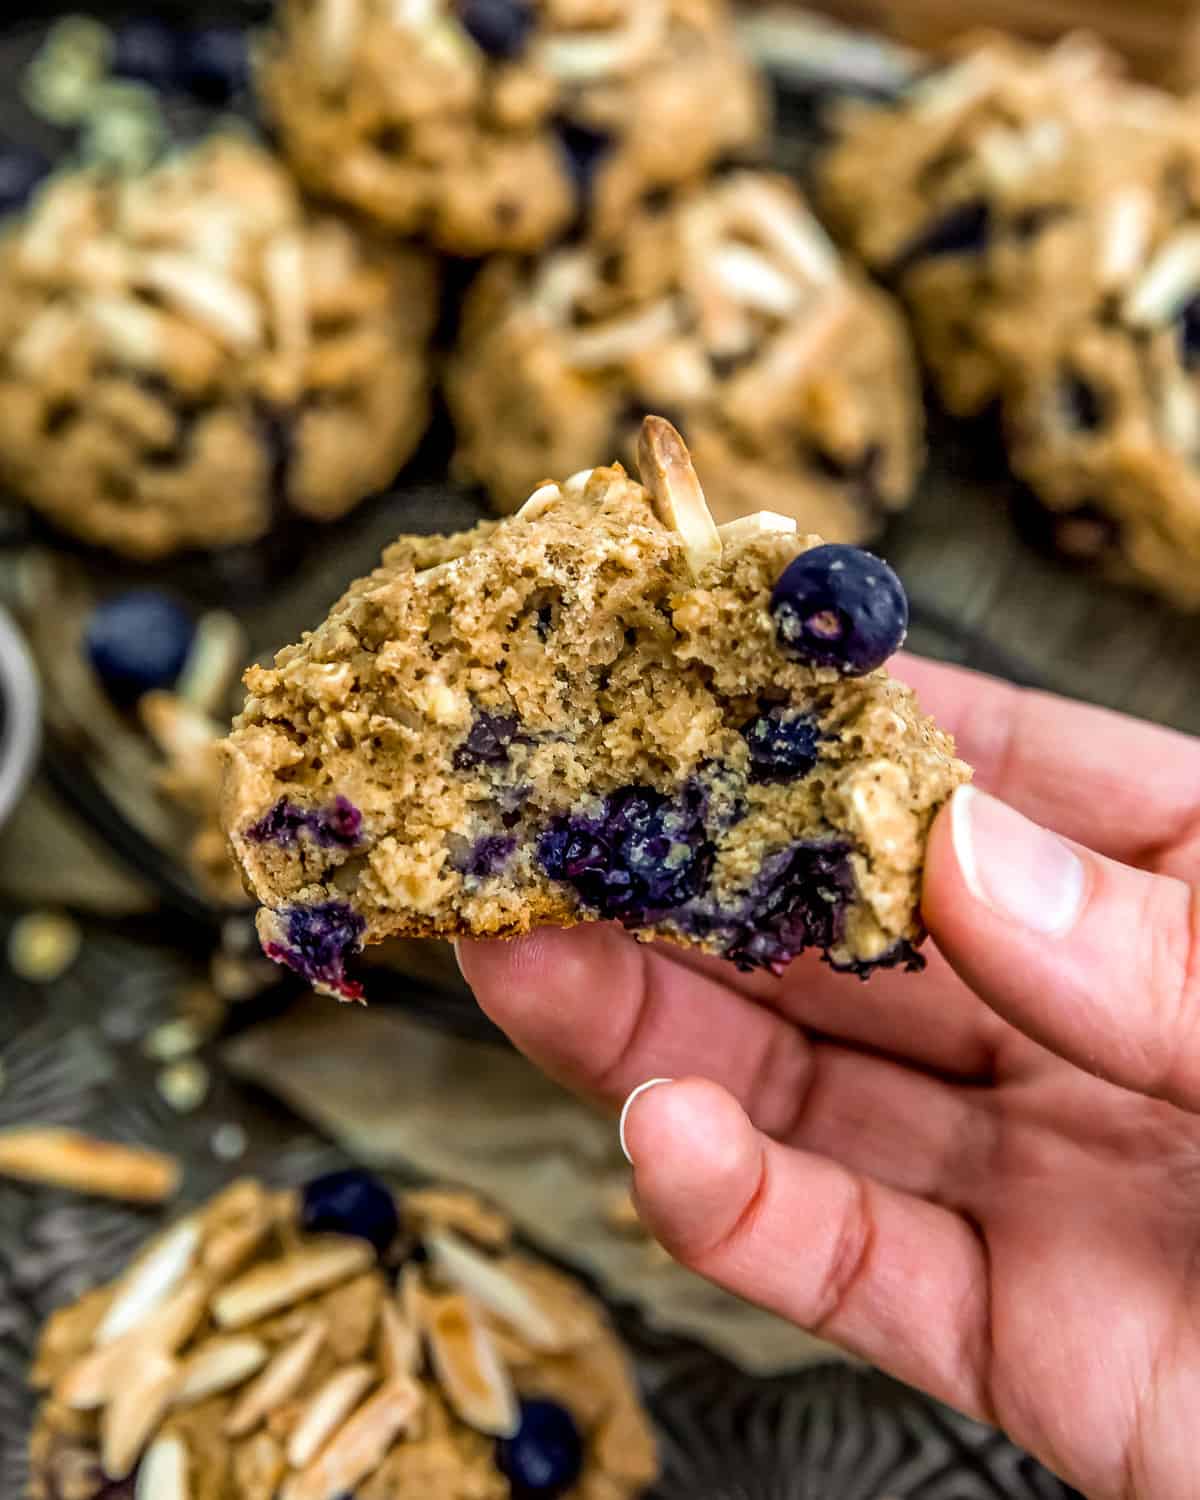 Holding a Blueberry Almond Breakfast Cookie